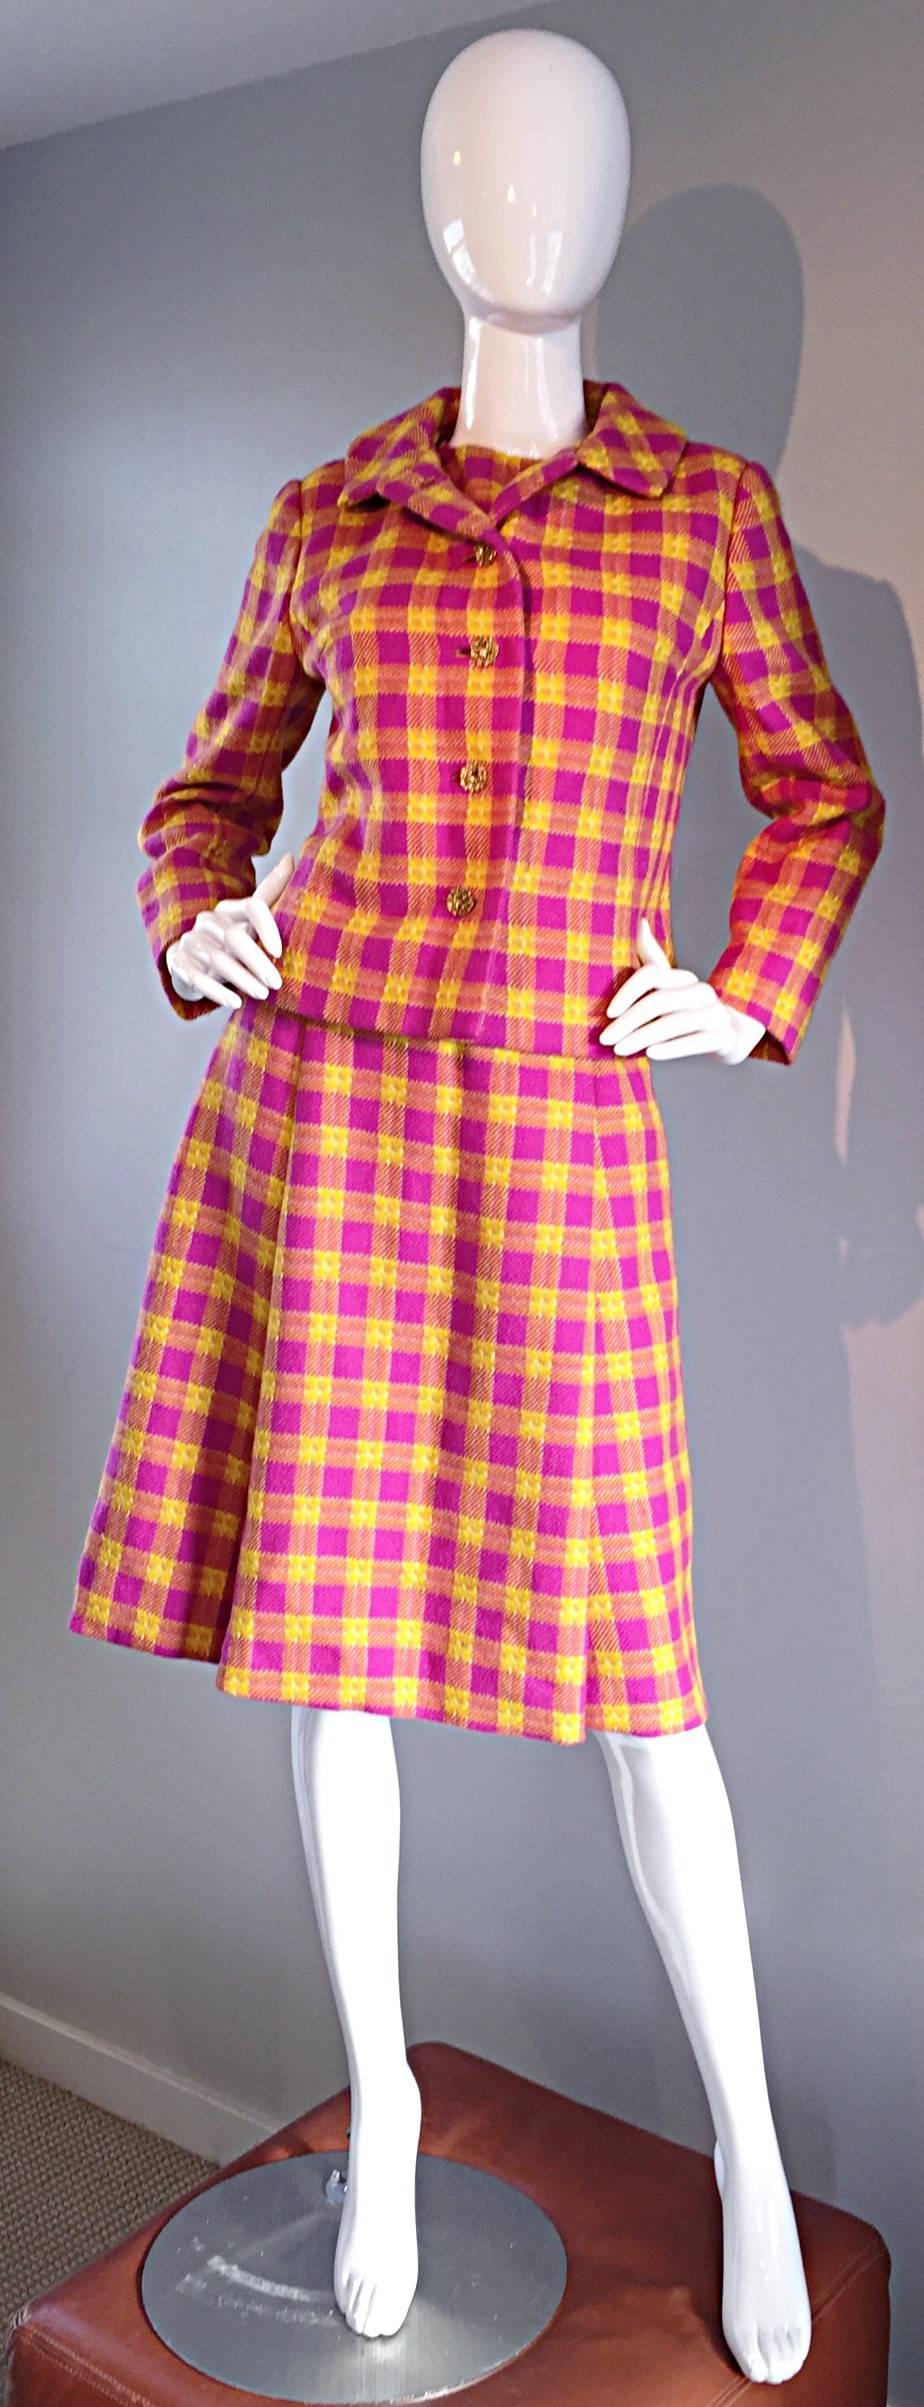 Brand new chic 60s vintage Bill Blass for Maurice Retner fuchsia and yellow plaid A-Line dress, AND matching jacket. BRAND NEW, with original SAKs 5th Ave. tags still attached. Dress is so flattering, and looks amazing on! Impeccable construction,